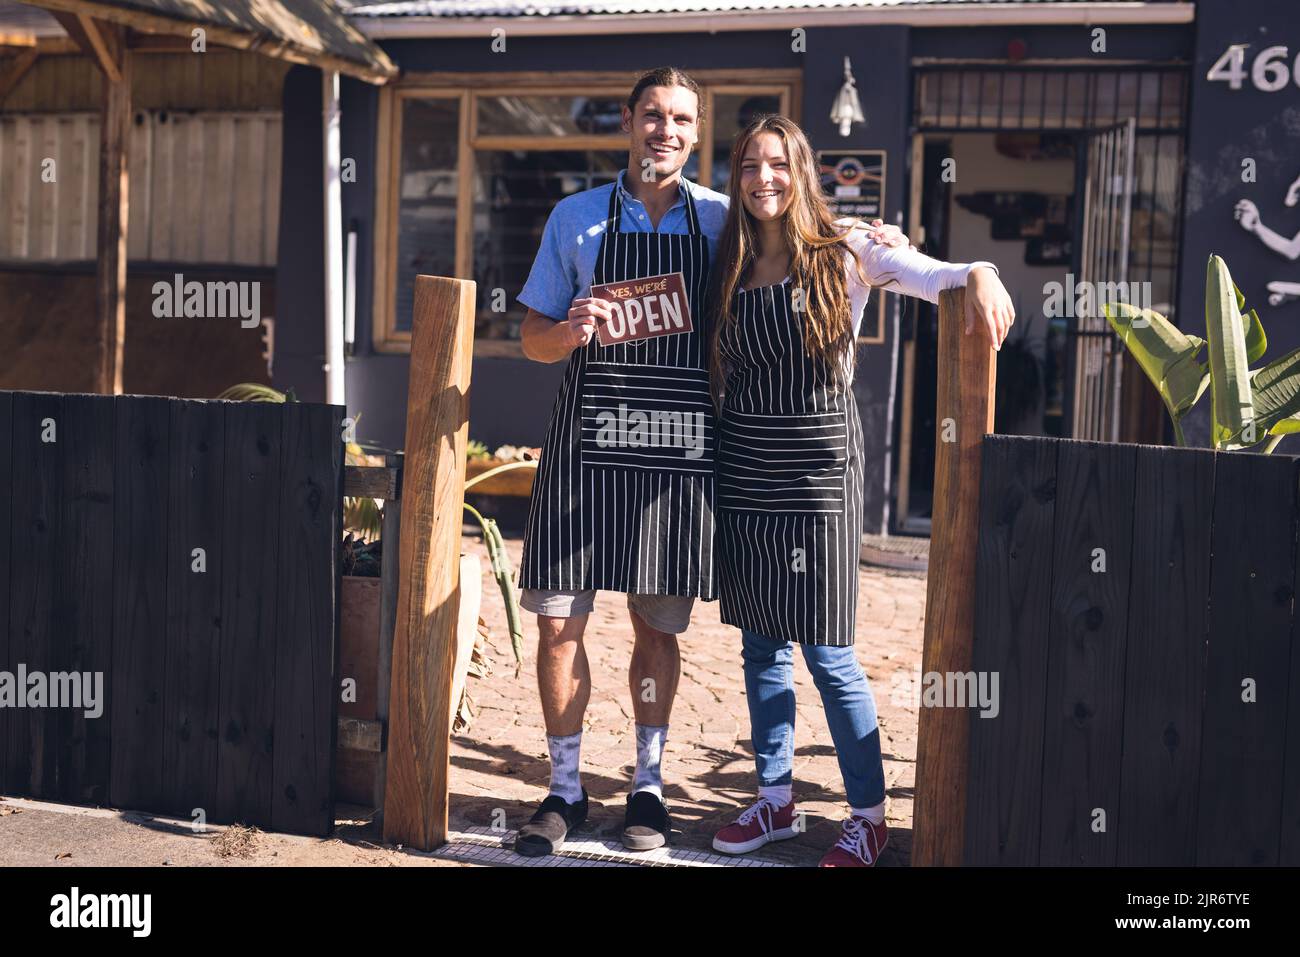 Image of happy caucasian woman and man in aprons and open sign in front of skate shop Stock Photo